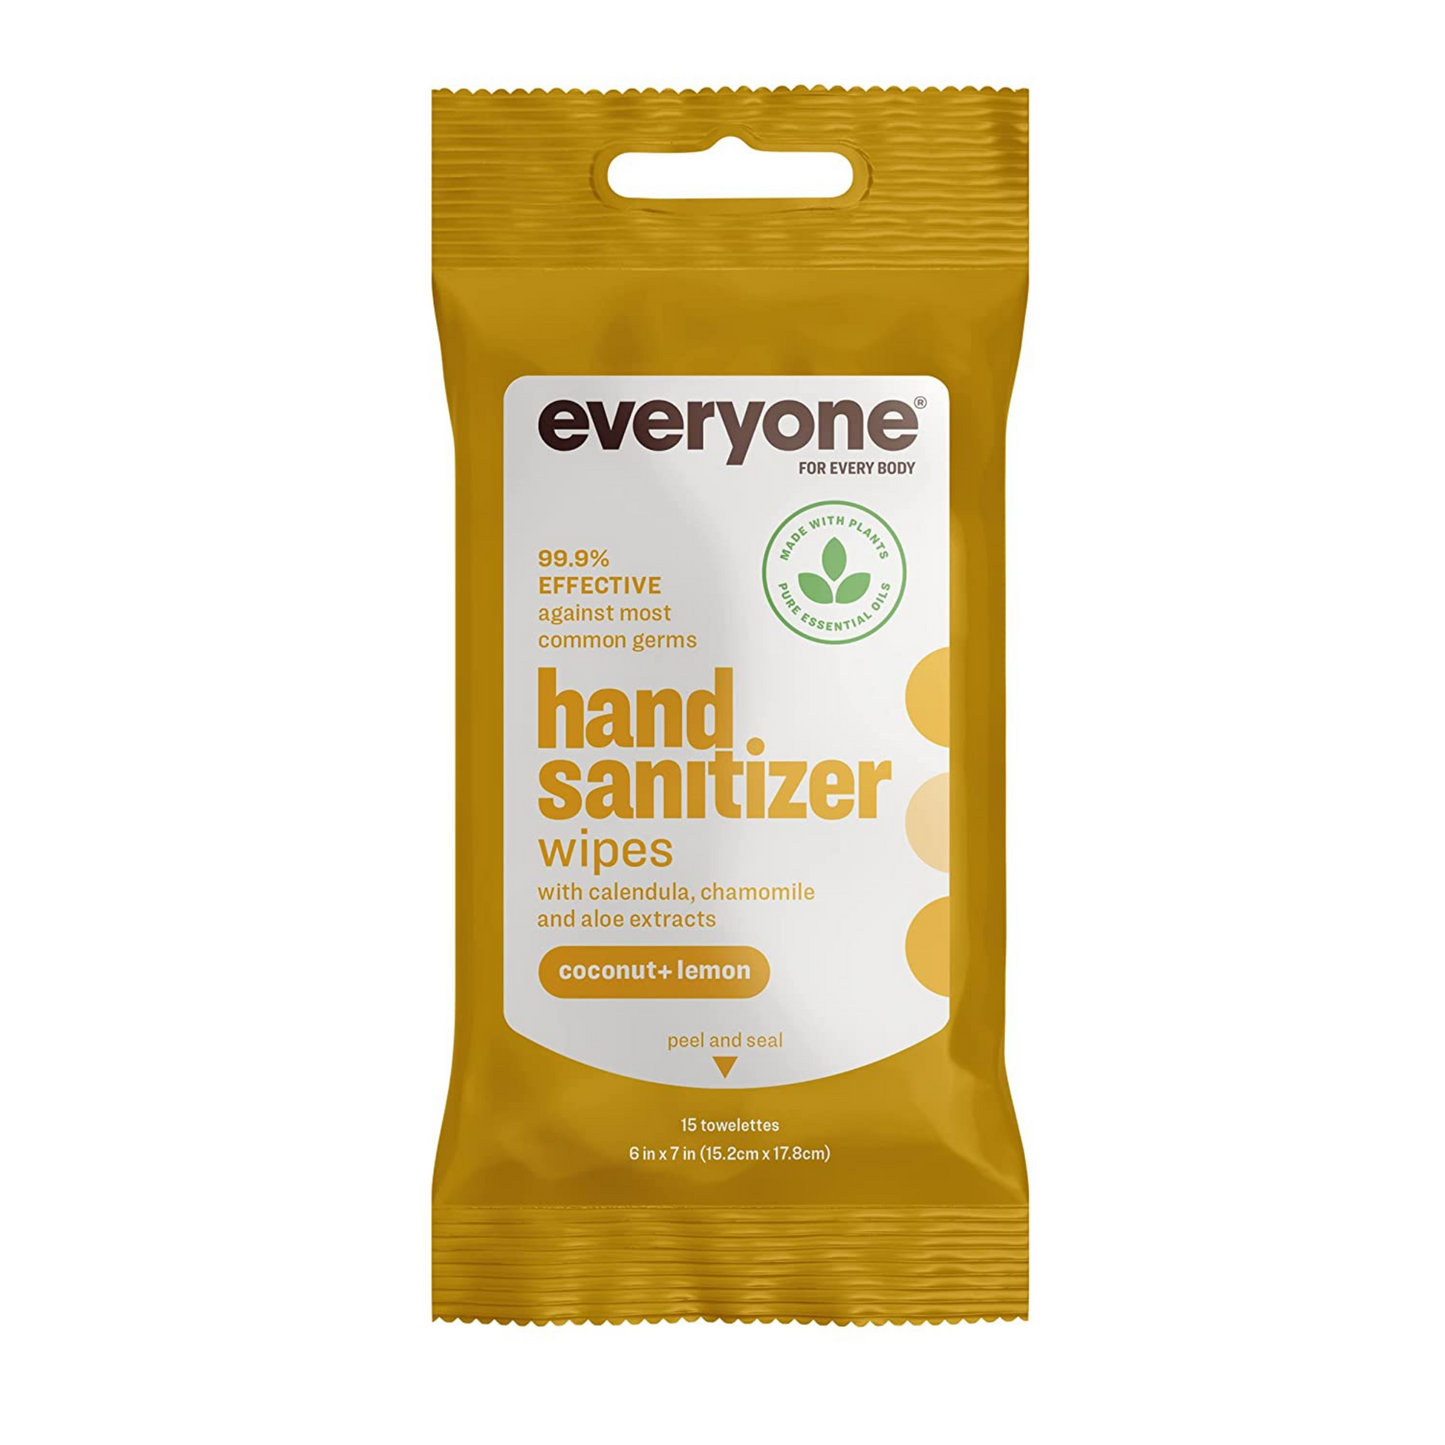 Primary Image of Coconut and Lemon Hand Sanitizer Wipes